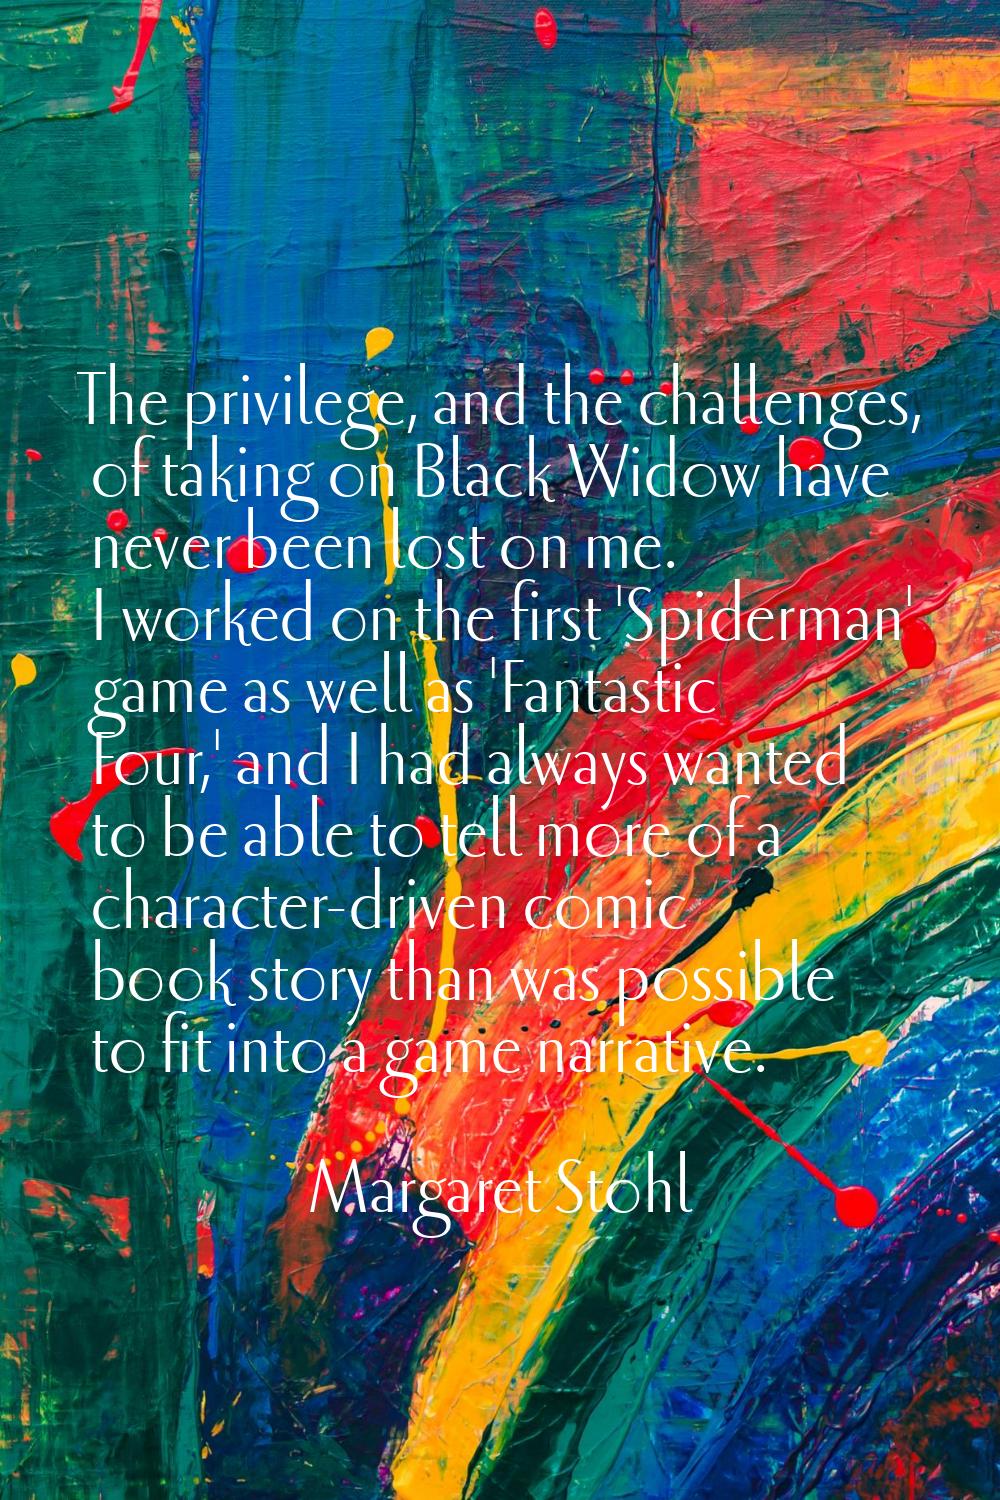 The privilege, and the challenges, of taking on Black Widow have never been lost on me. I worked on